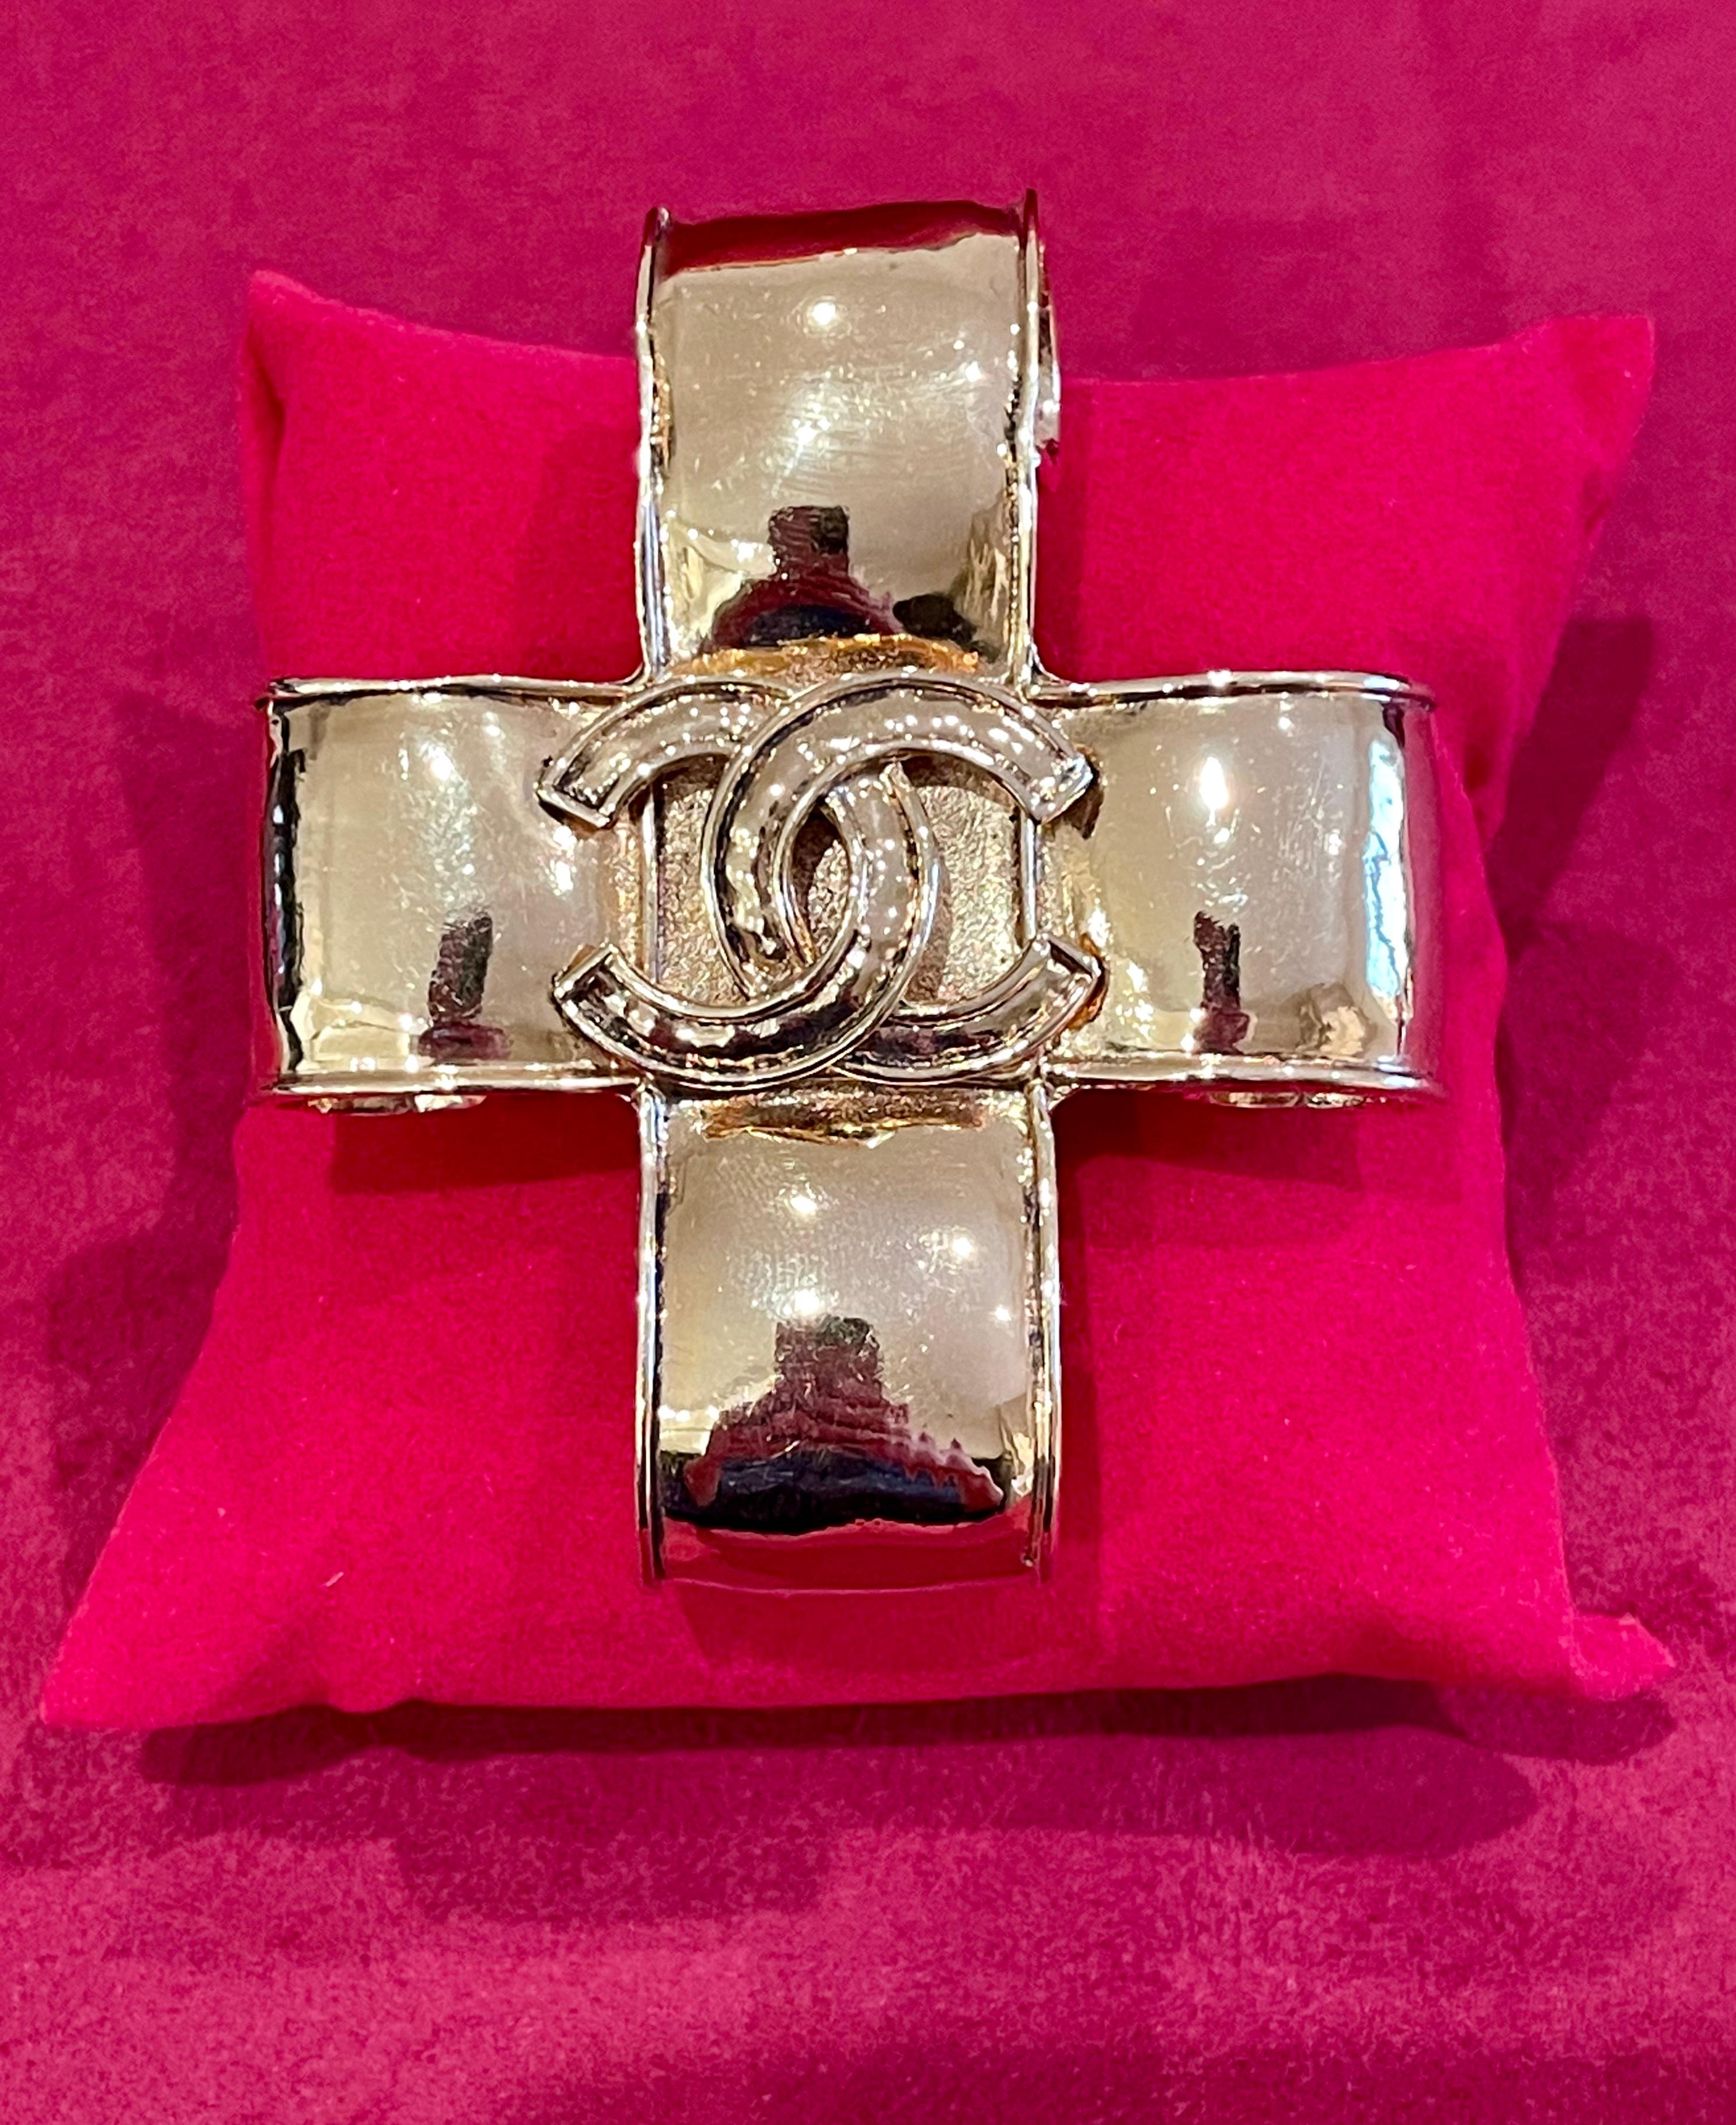 Superb Chanel brooch in gold plated with 94P scrolls forming a cross. Very beautiful model, of good size with in its center the famous 